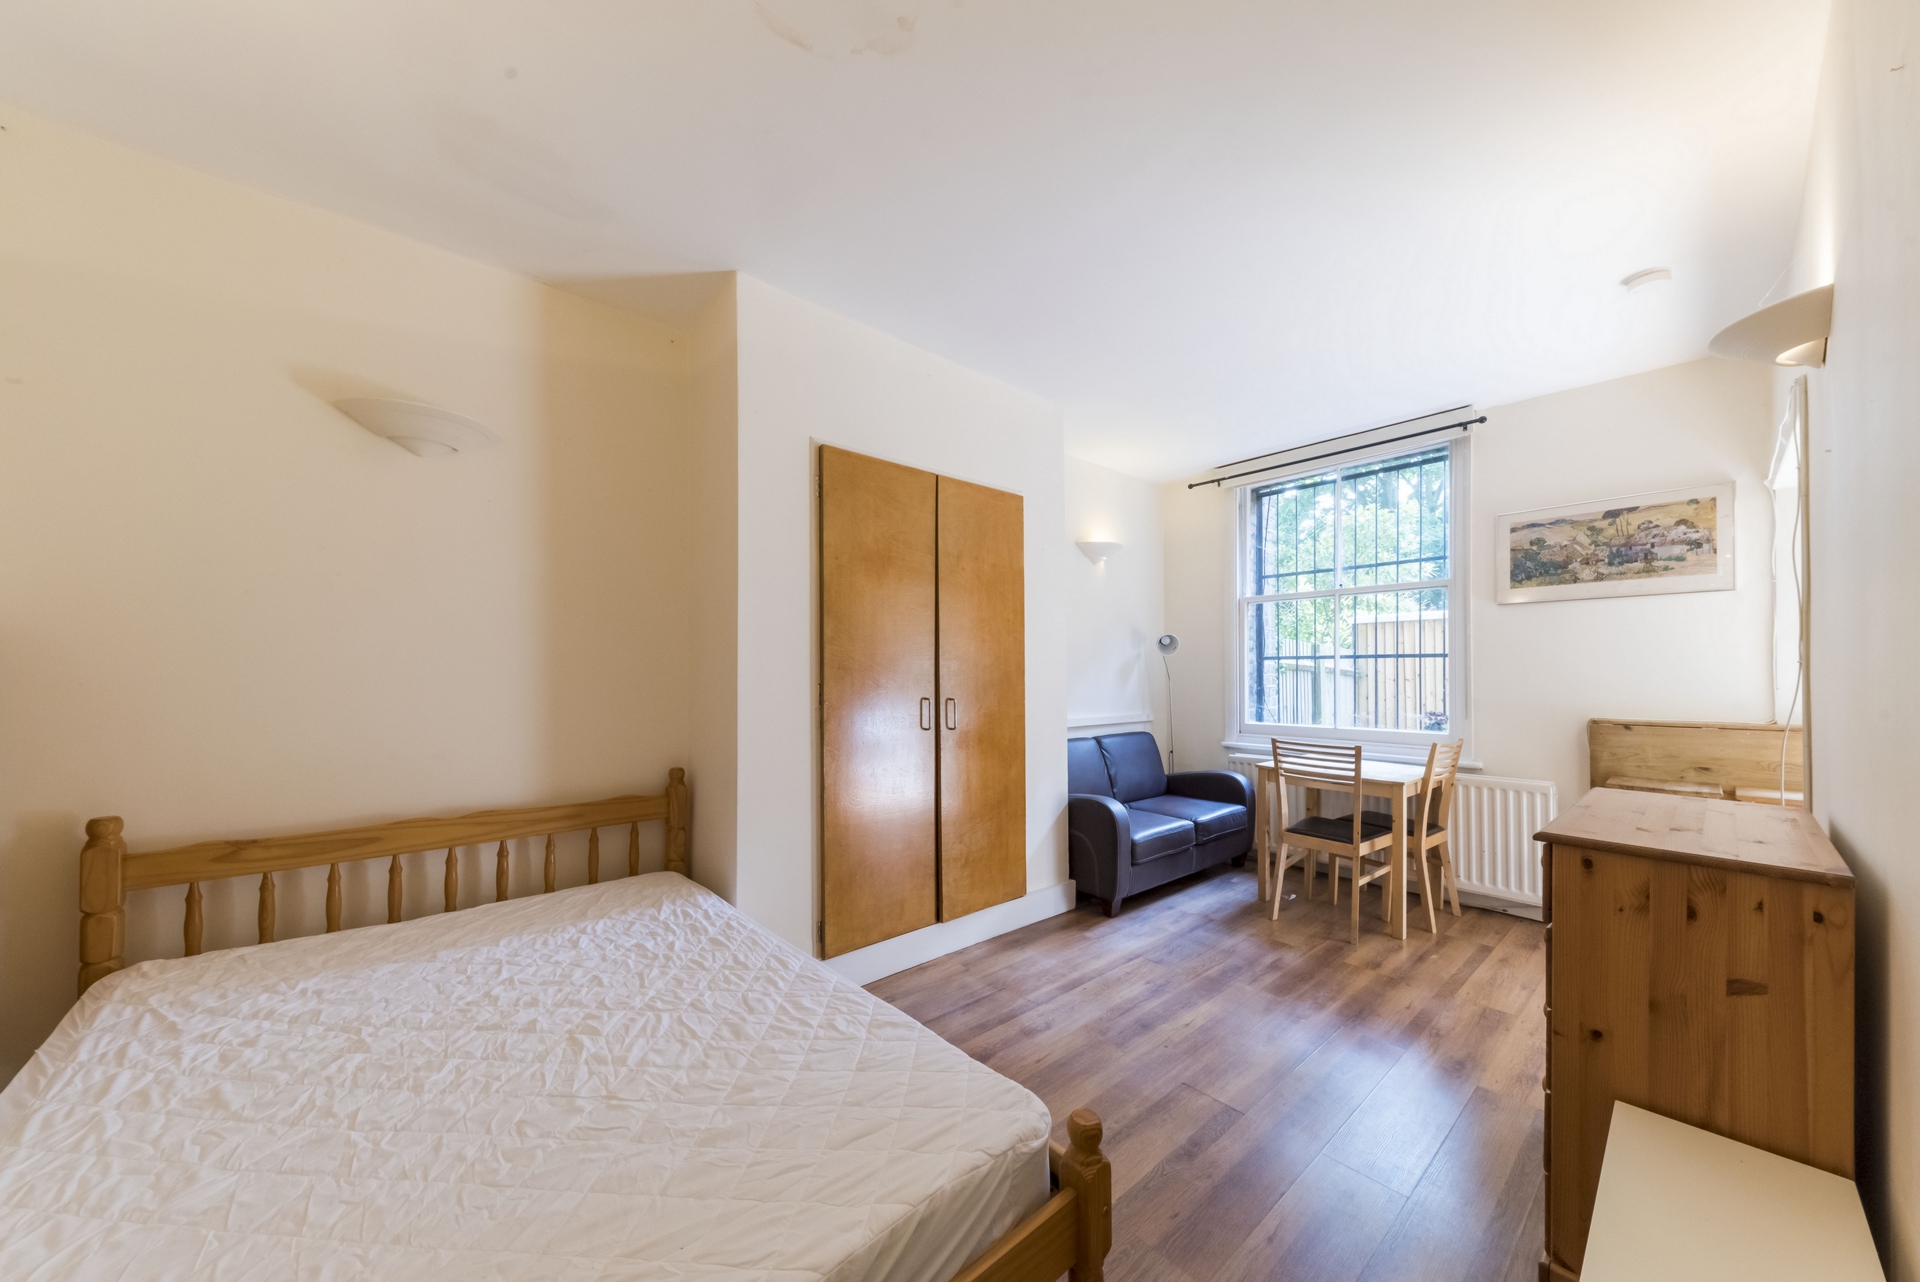 Flat to rent in West Hampstead, London, NW6